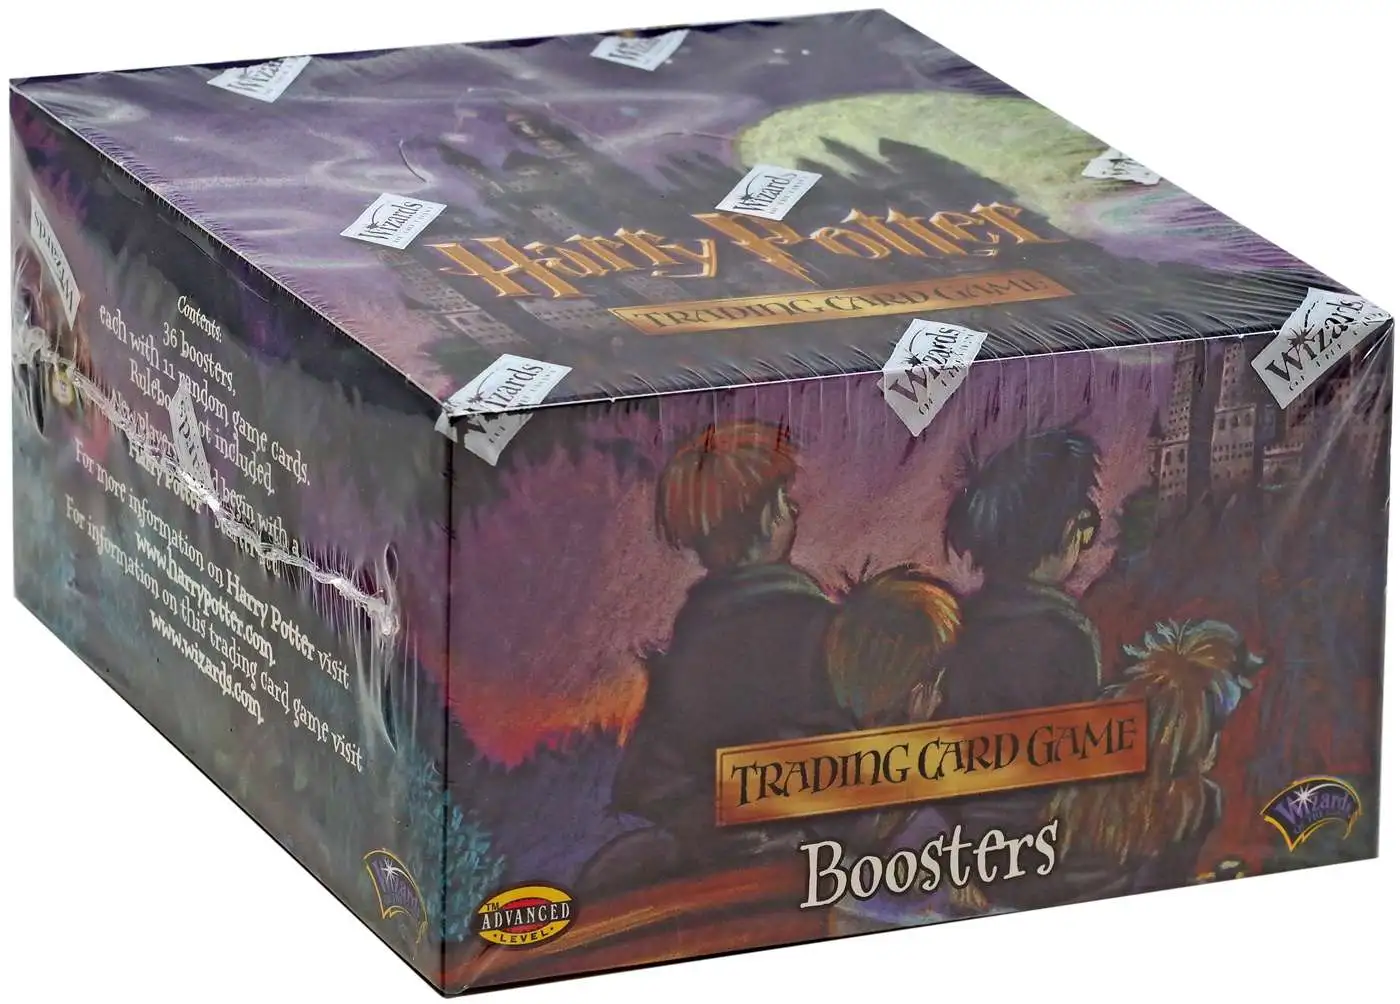 NEW Harry Potter Trading Card Game Adventures at Hogwarts Booster Packs SEALED 